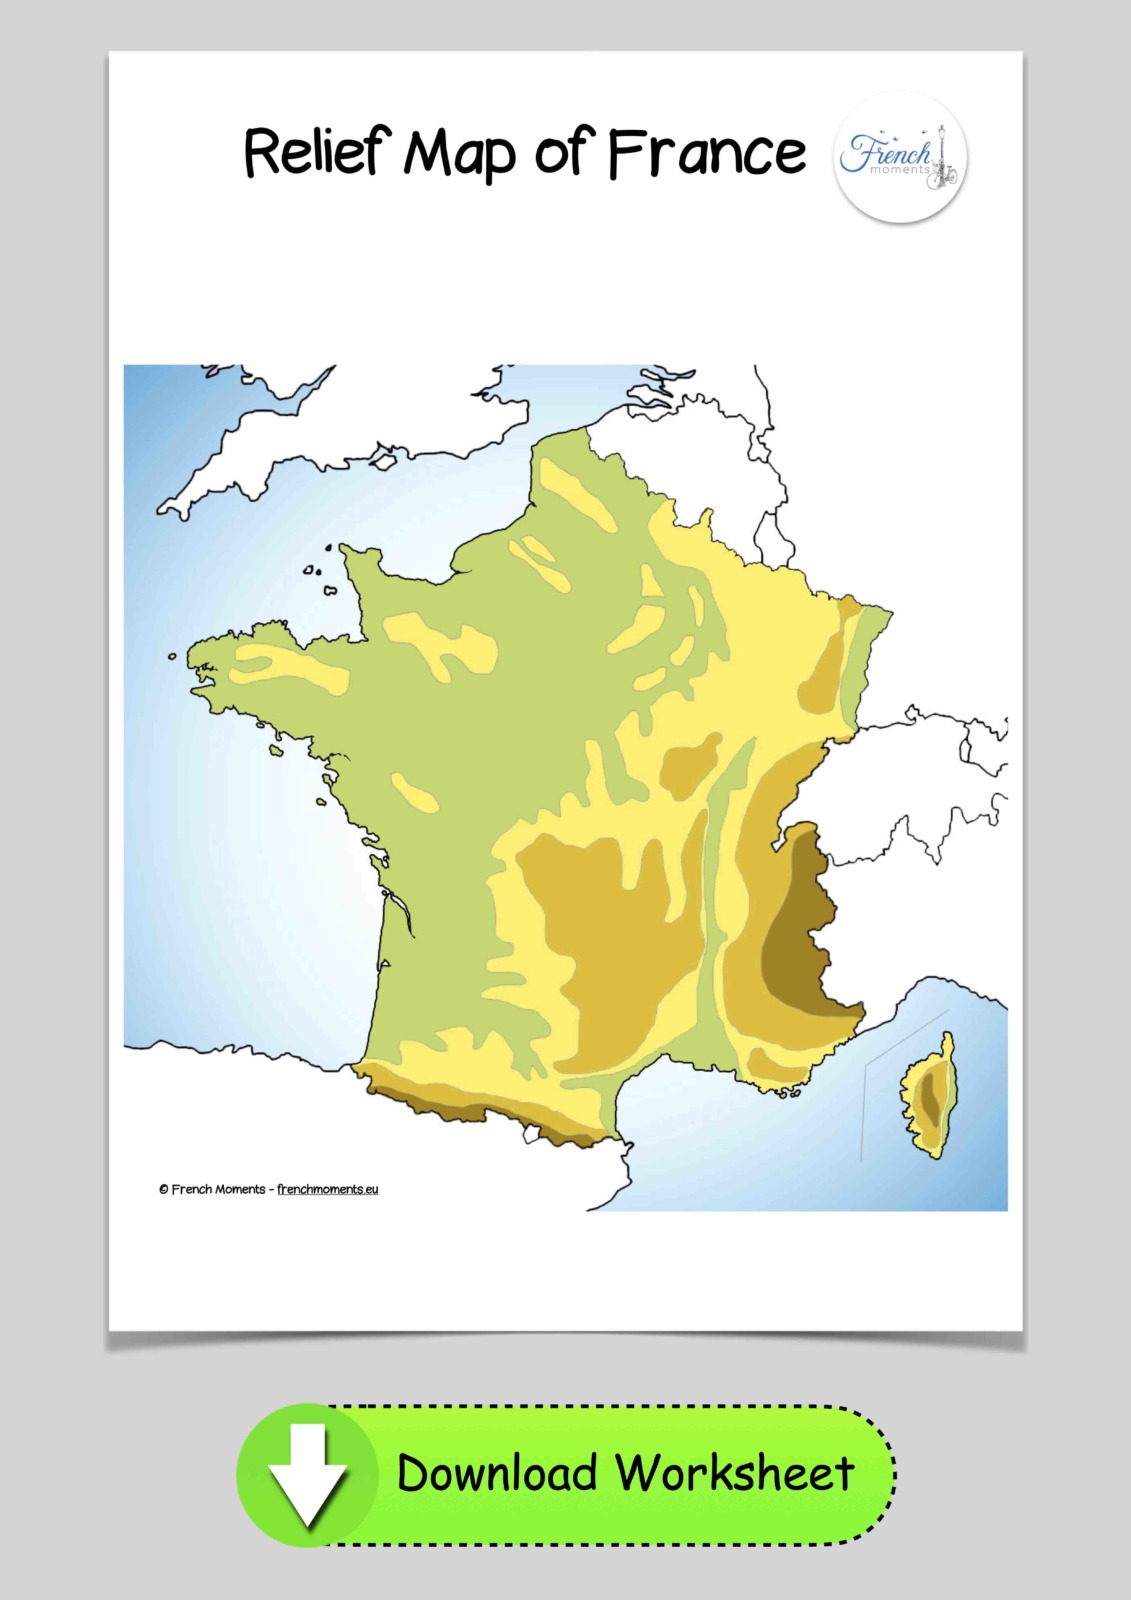 Blank Map of France Relief © French Moments